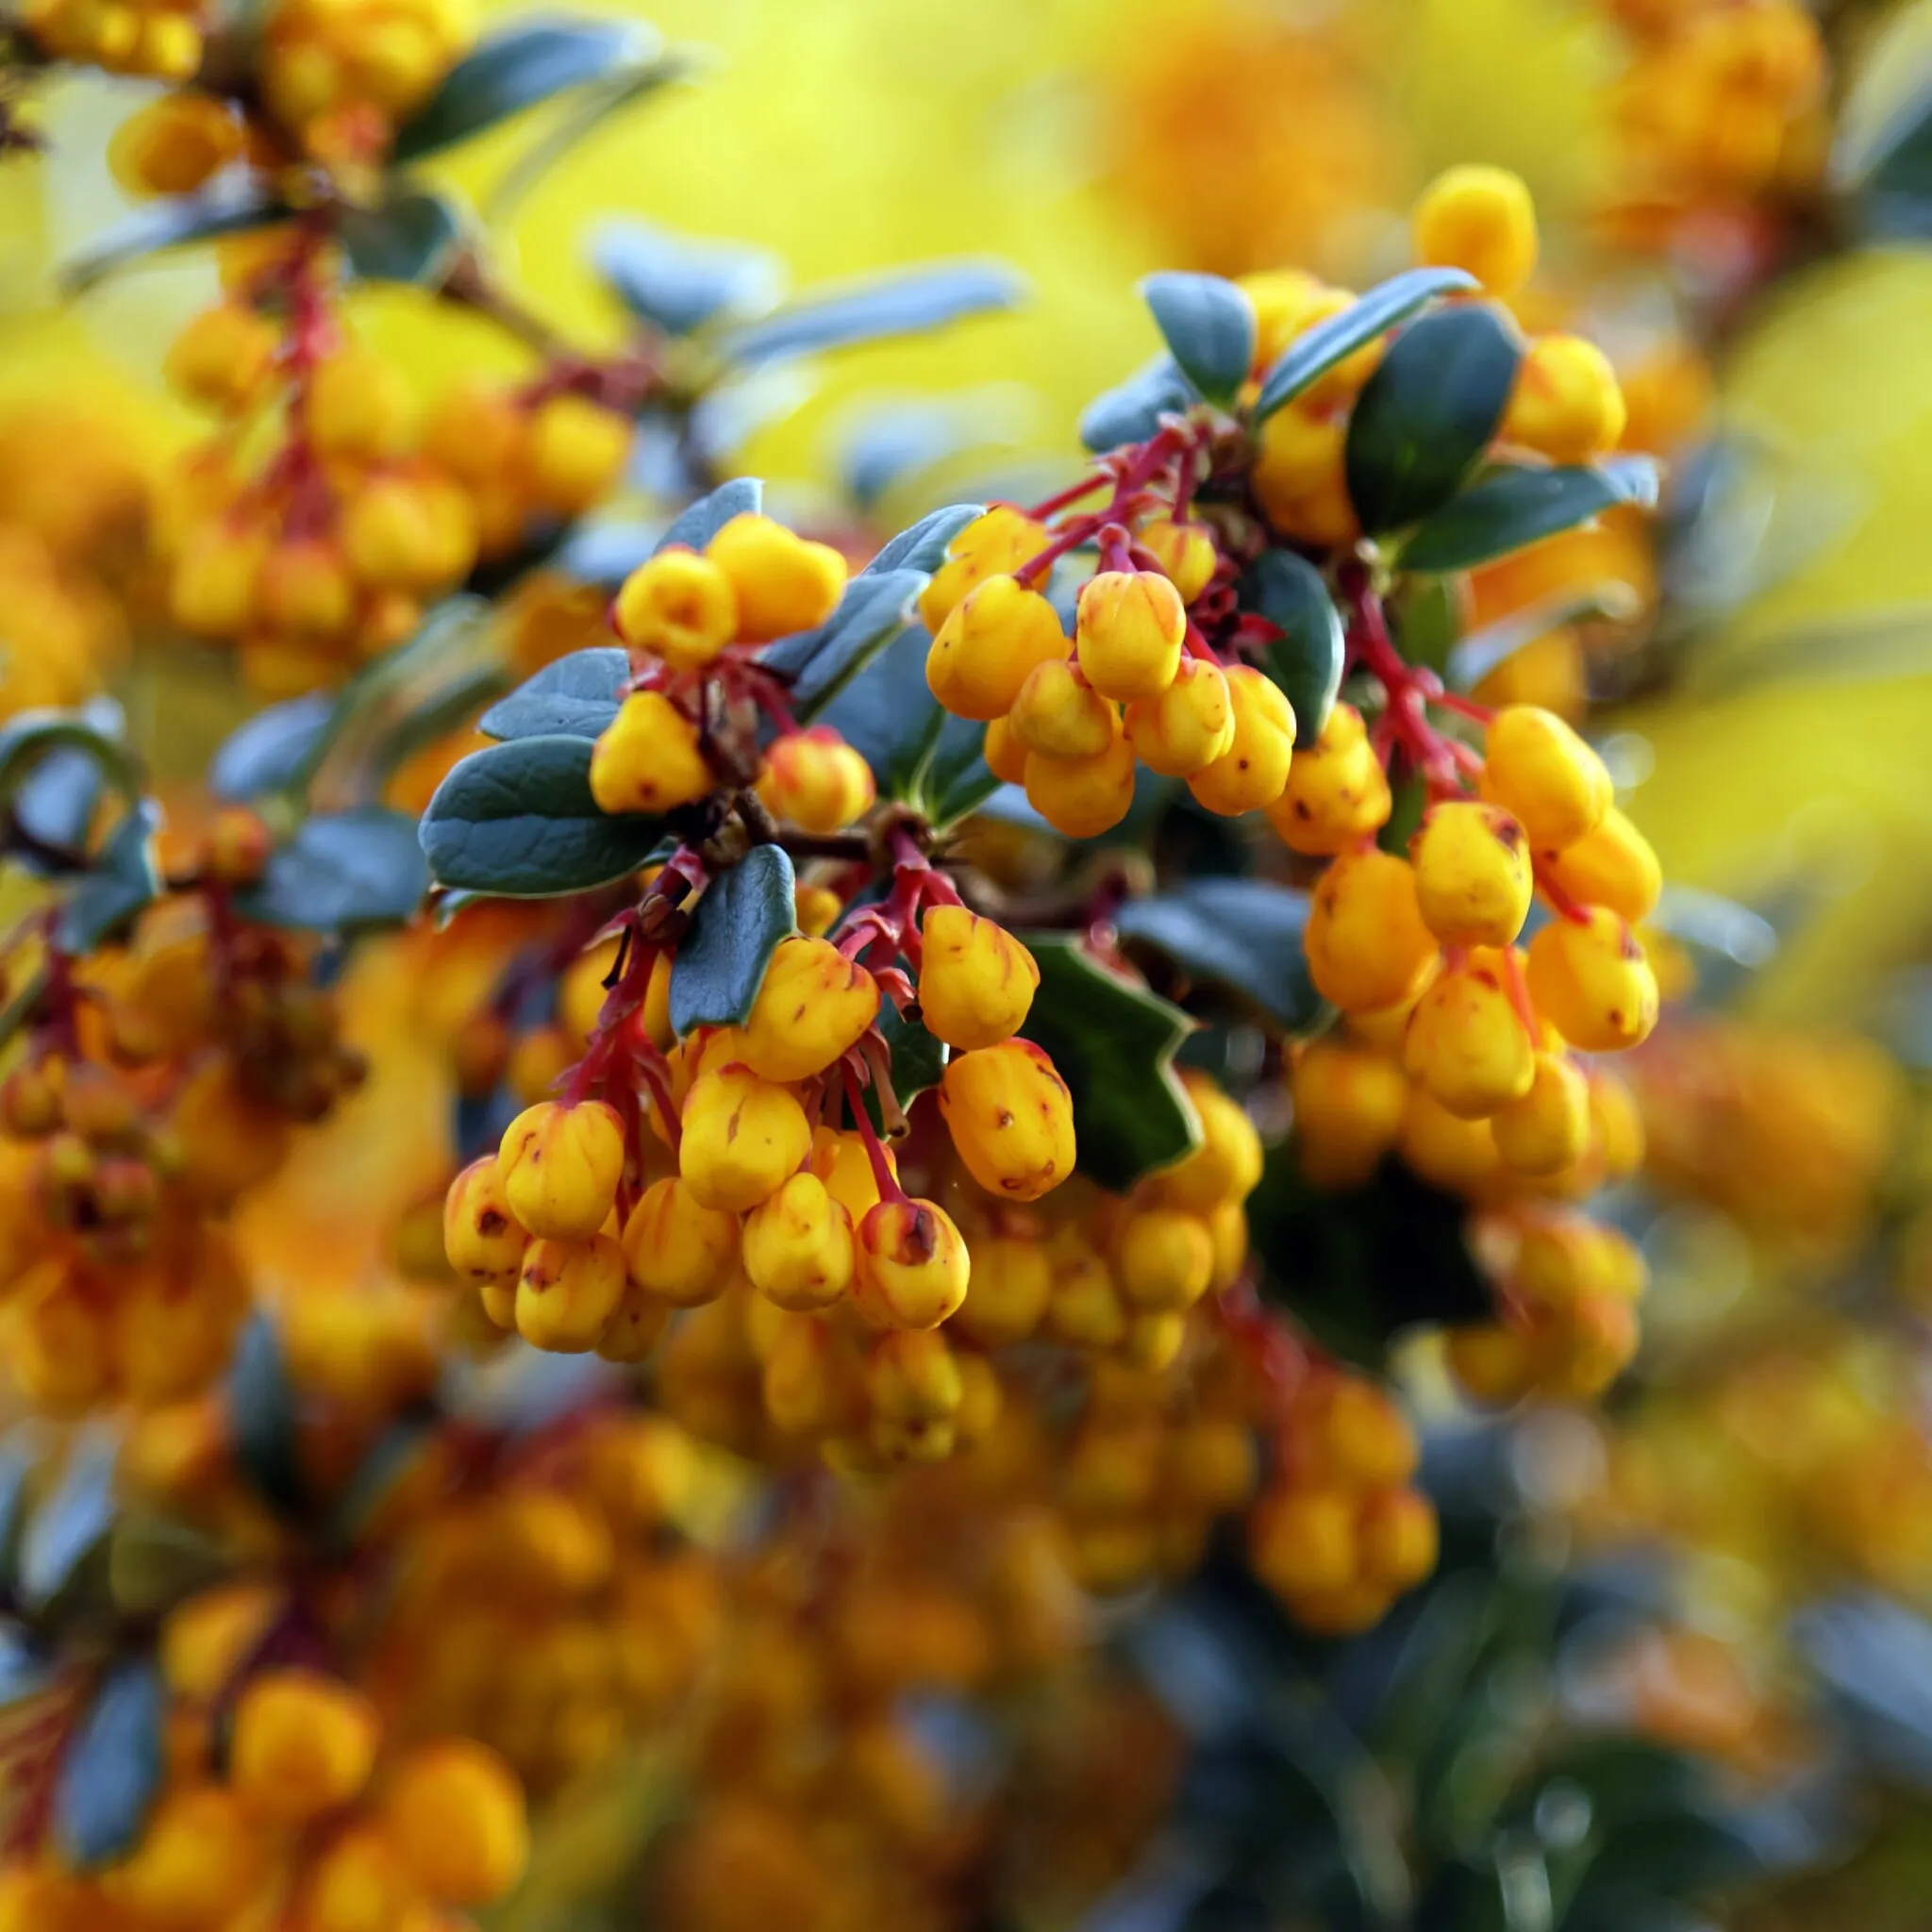 Photo showing: A flowering Berberis darwinii shrub at the east of the civil parish of Great Saling, Essex, England. Camera: Canon EOS 6D with Canon EF 24-105mm F4L IS USM lens. Software: large RAW file lens-corrected, optimized and downsized with DxO OpticsPro 10 Elite, Viewpoint 2, and Adobe Photoshop CS2.